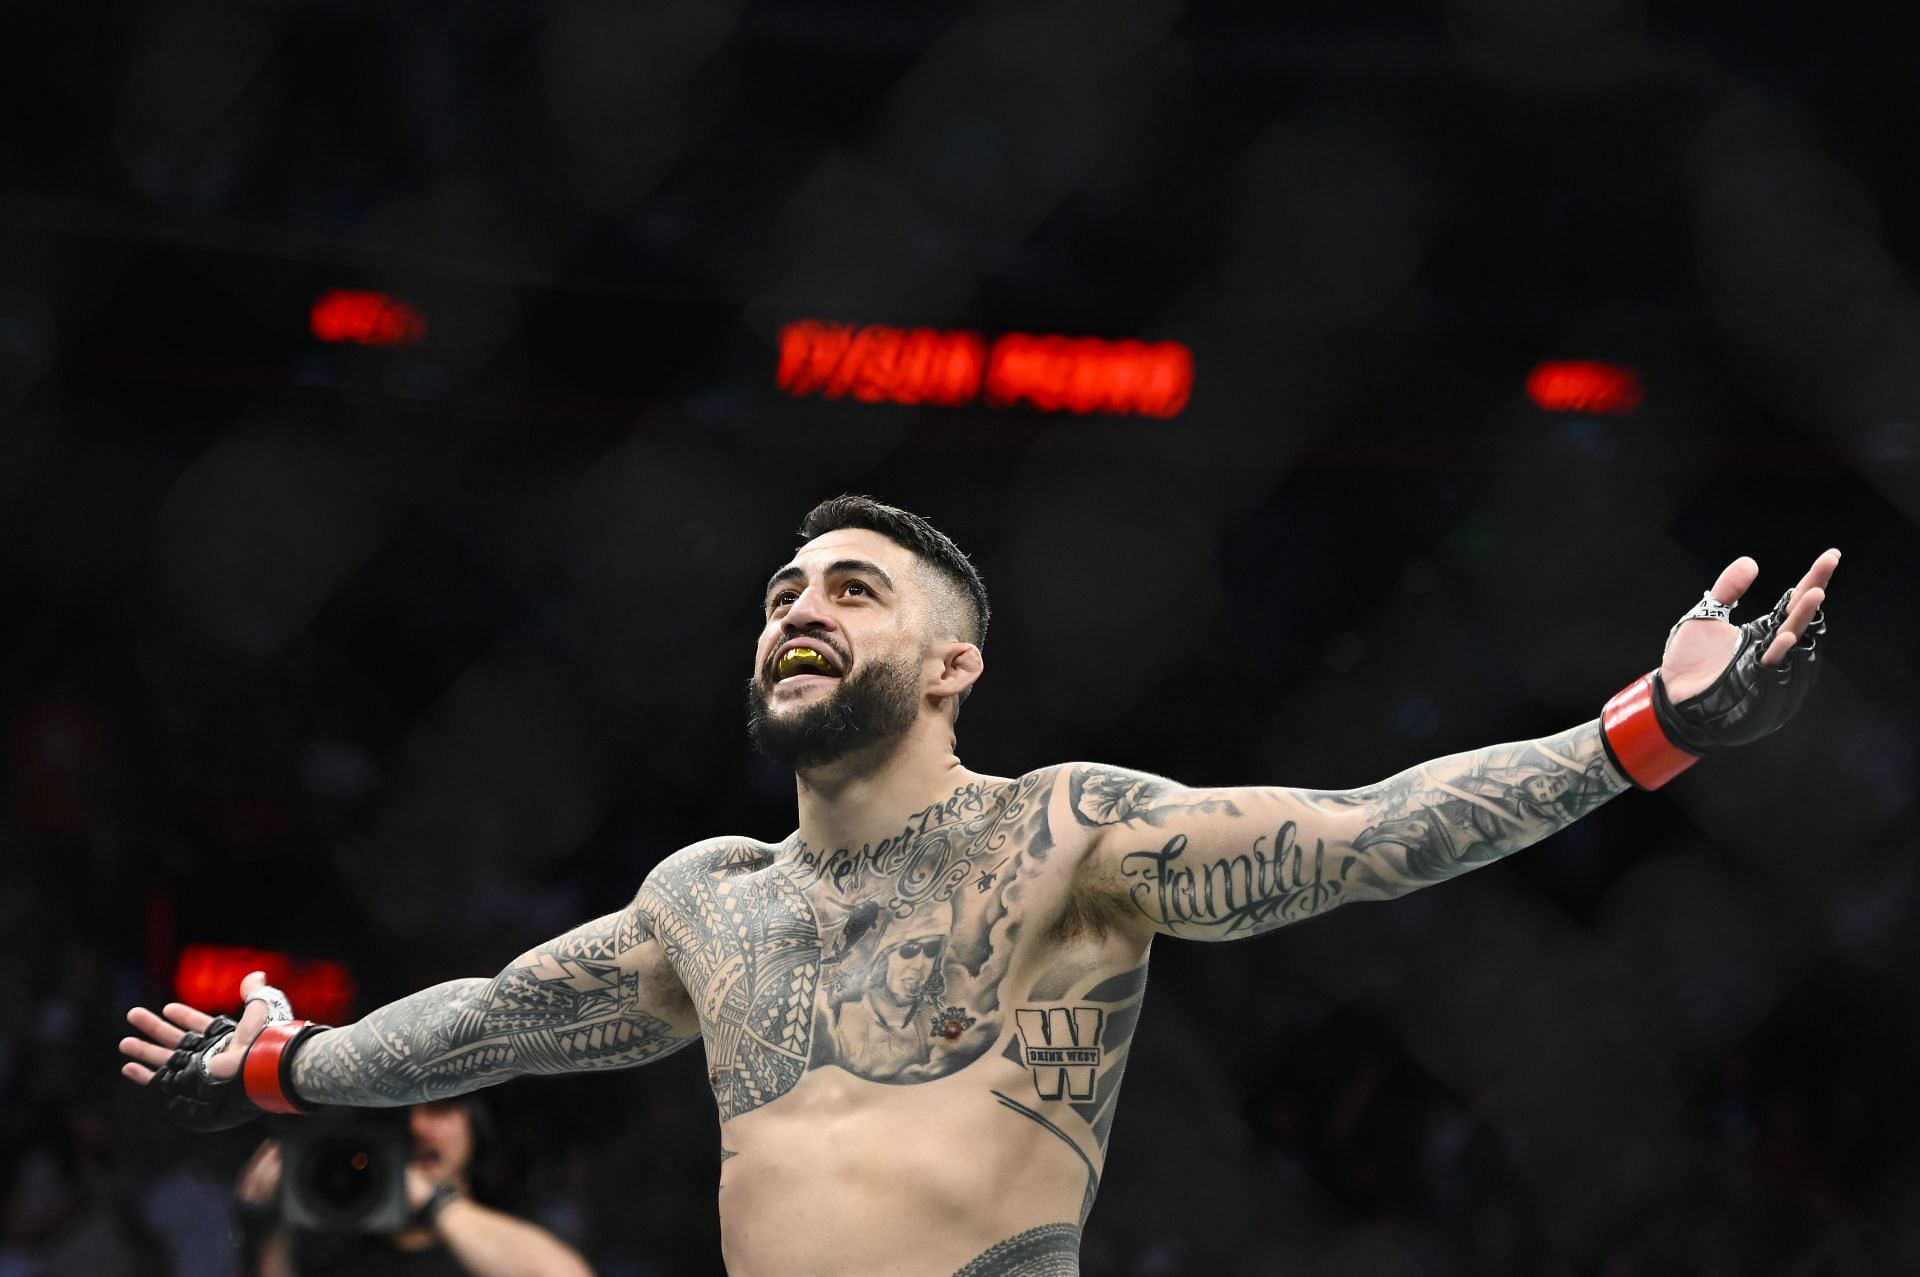 Following a bad injury, Tyson Pedro looks primed to make a run for the top at 205lbs